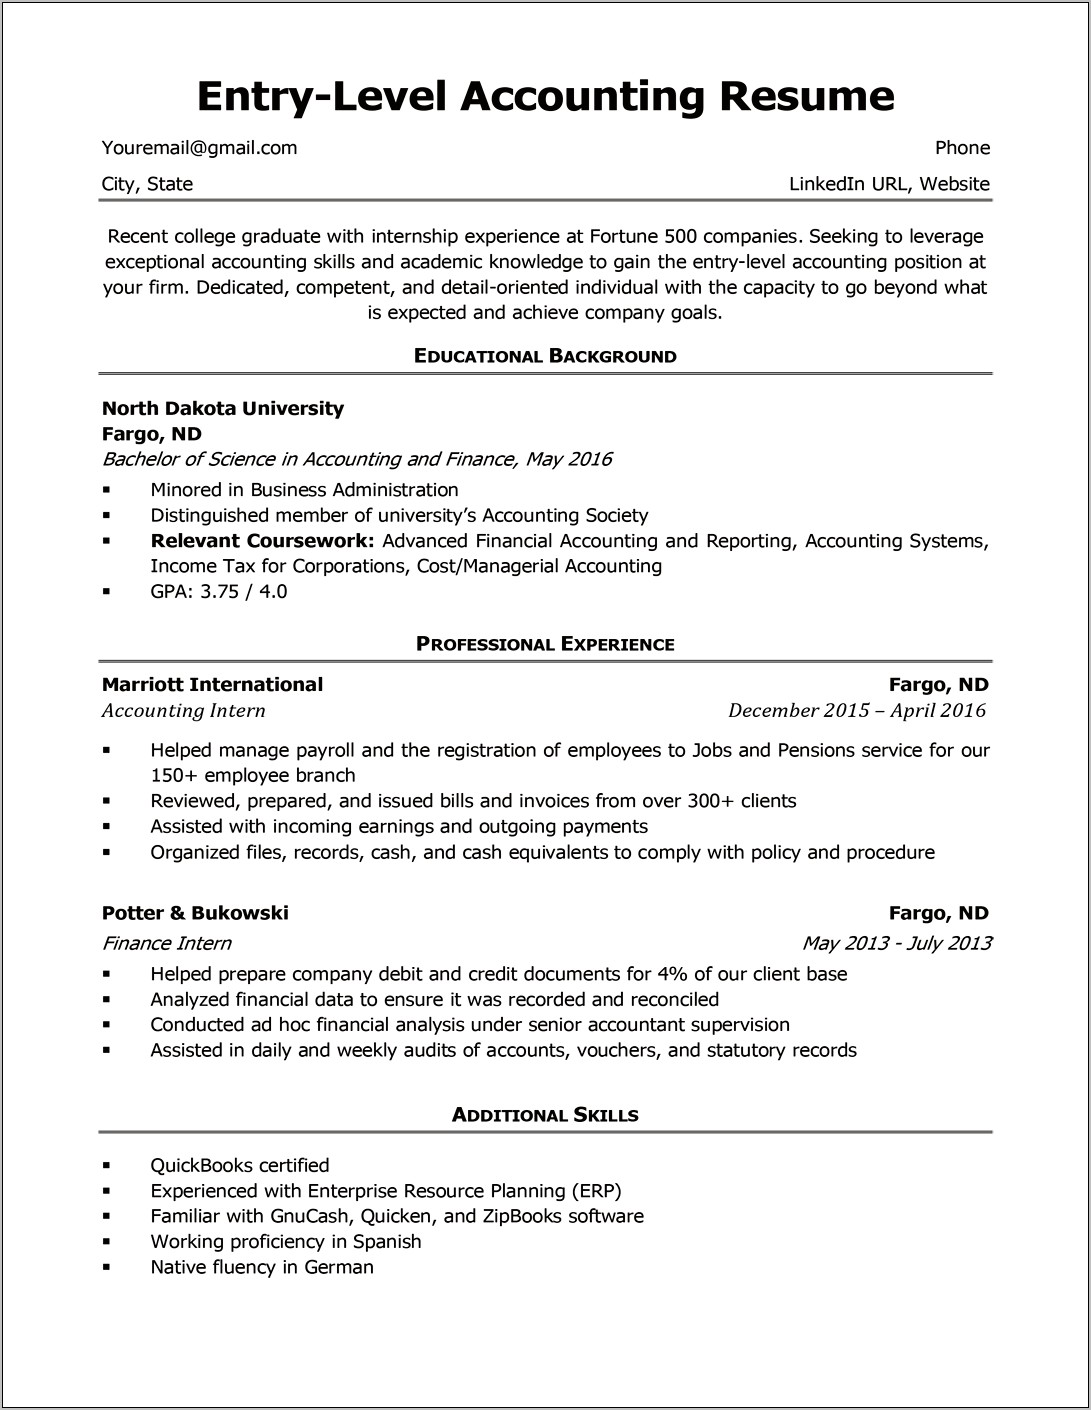 Accounting Resume Entry Level Example